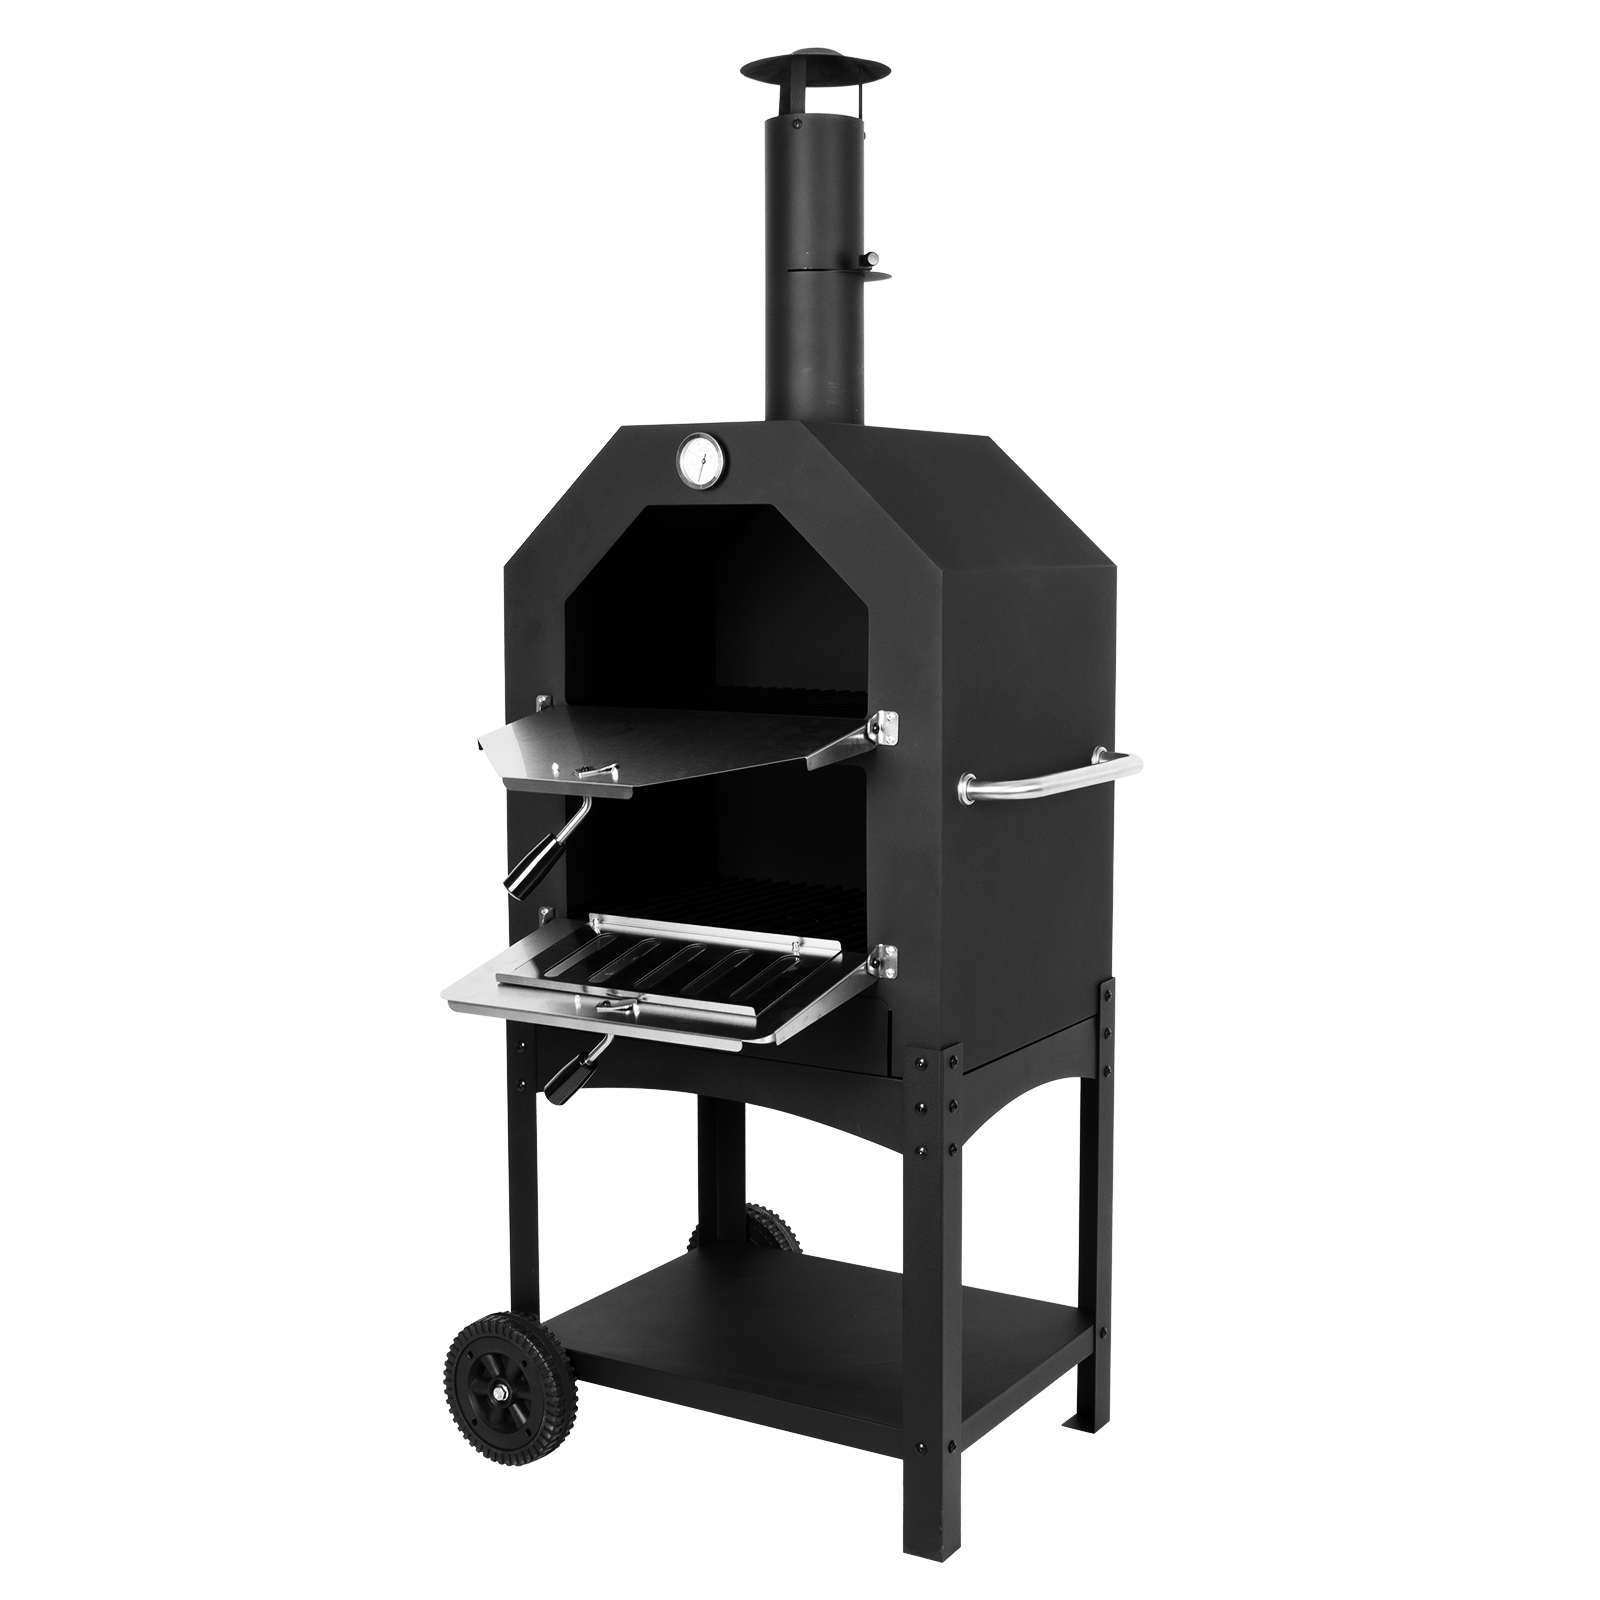 Outdoor Pizza Oven Wood Fired Pizza Oven Patio Portable Pizza Maker Cooking Grill with Wheels Waterproof Cover - image 5 of 7